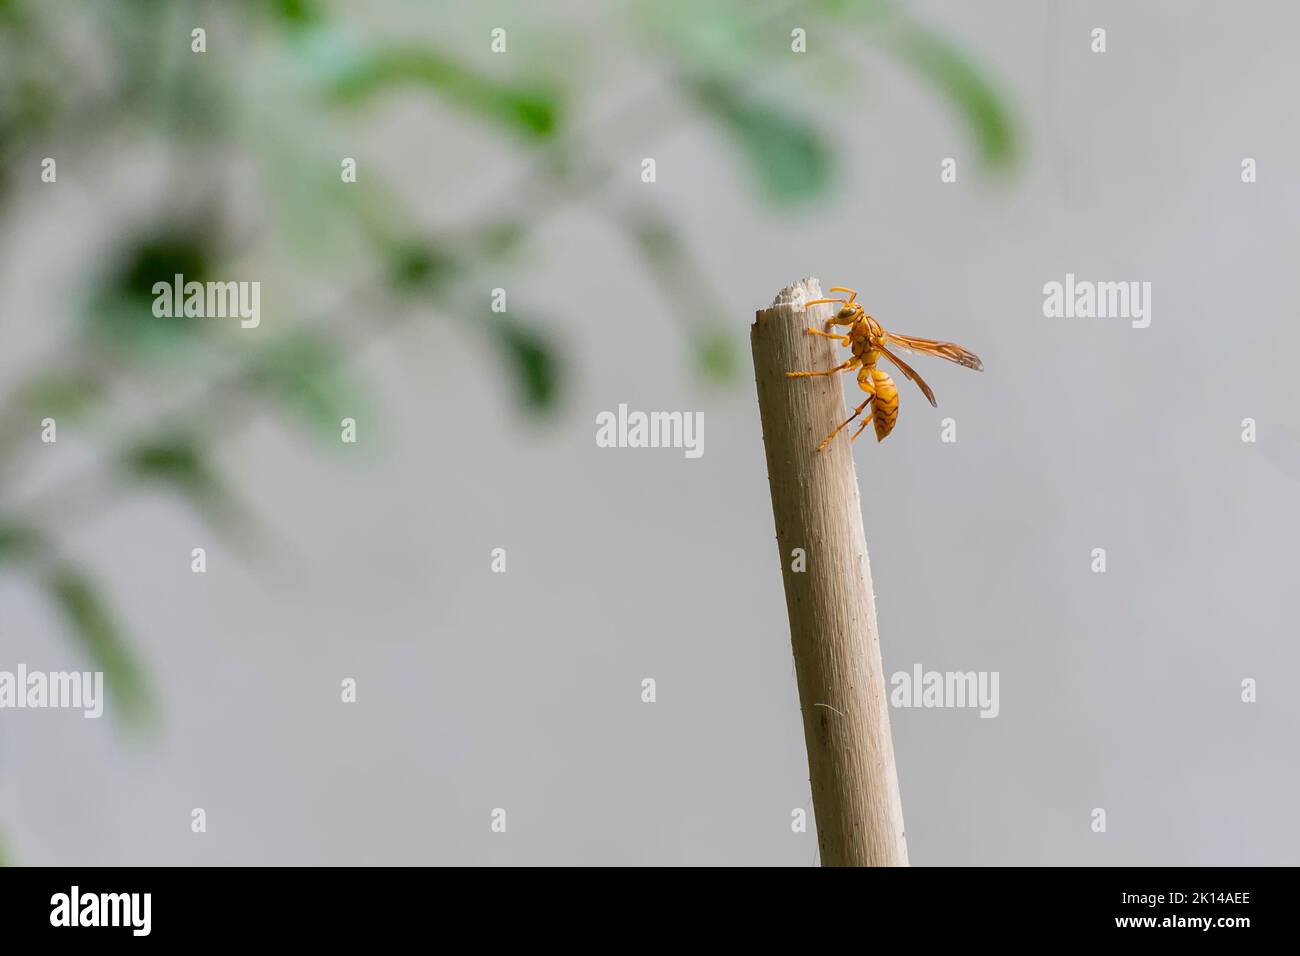 Vespula vulgaris, known as the common wasp, hanging from a stick in home made garden. Howrah, West Bengal, India. Stock Photo